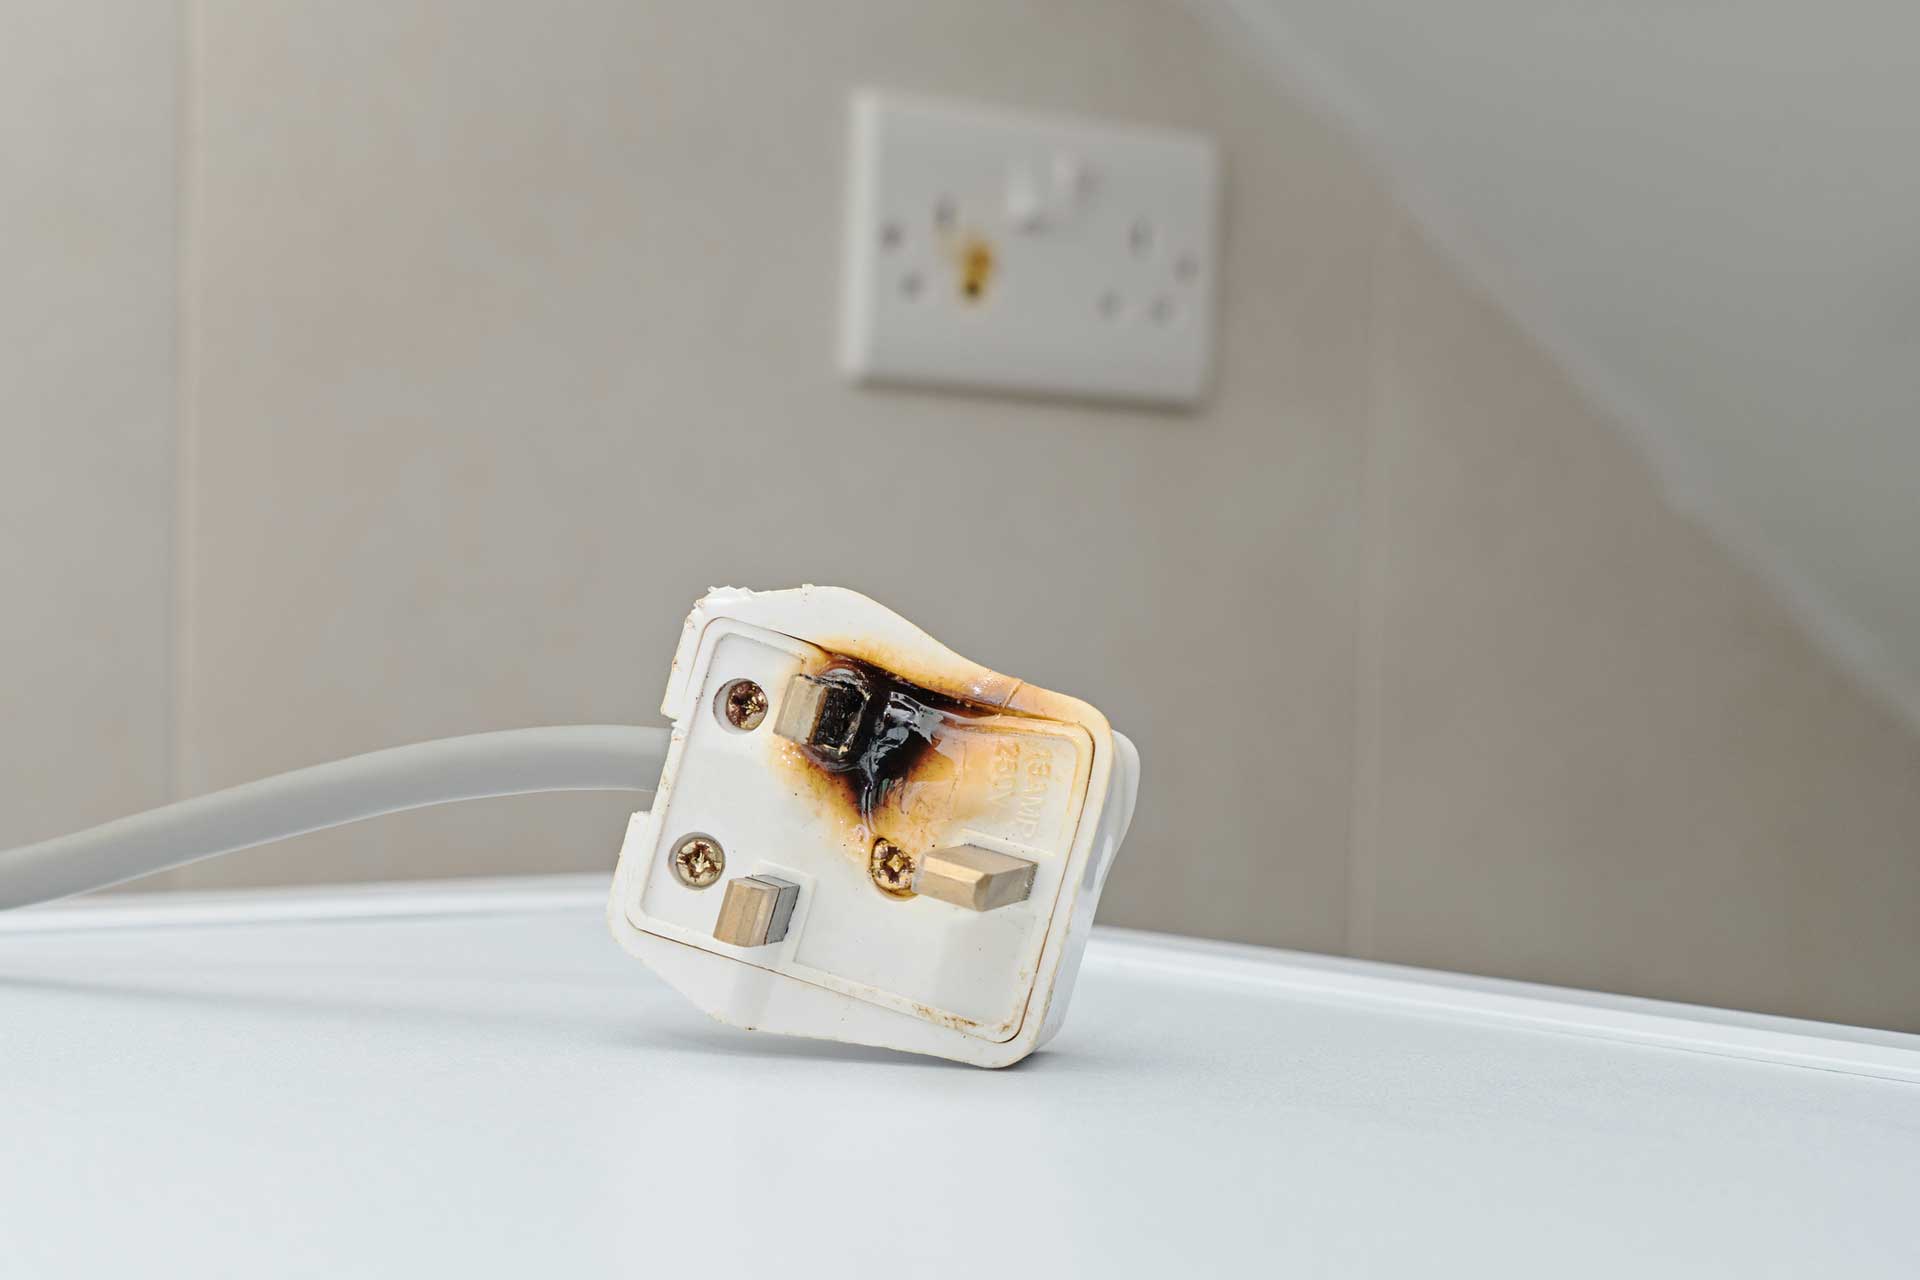 Burned ac power plugs and sockets — Los Angeles — LA Electrical Service